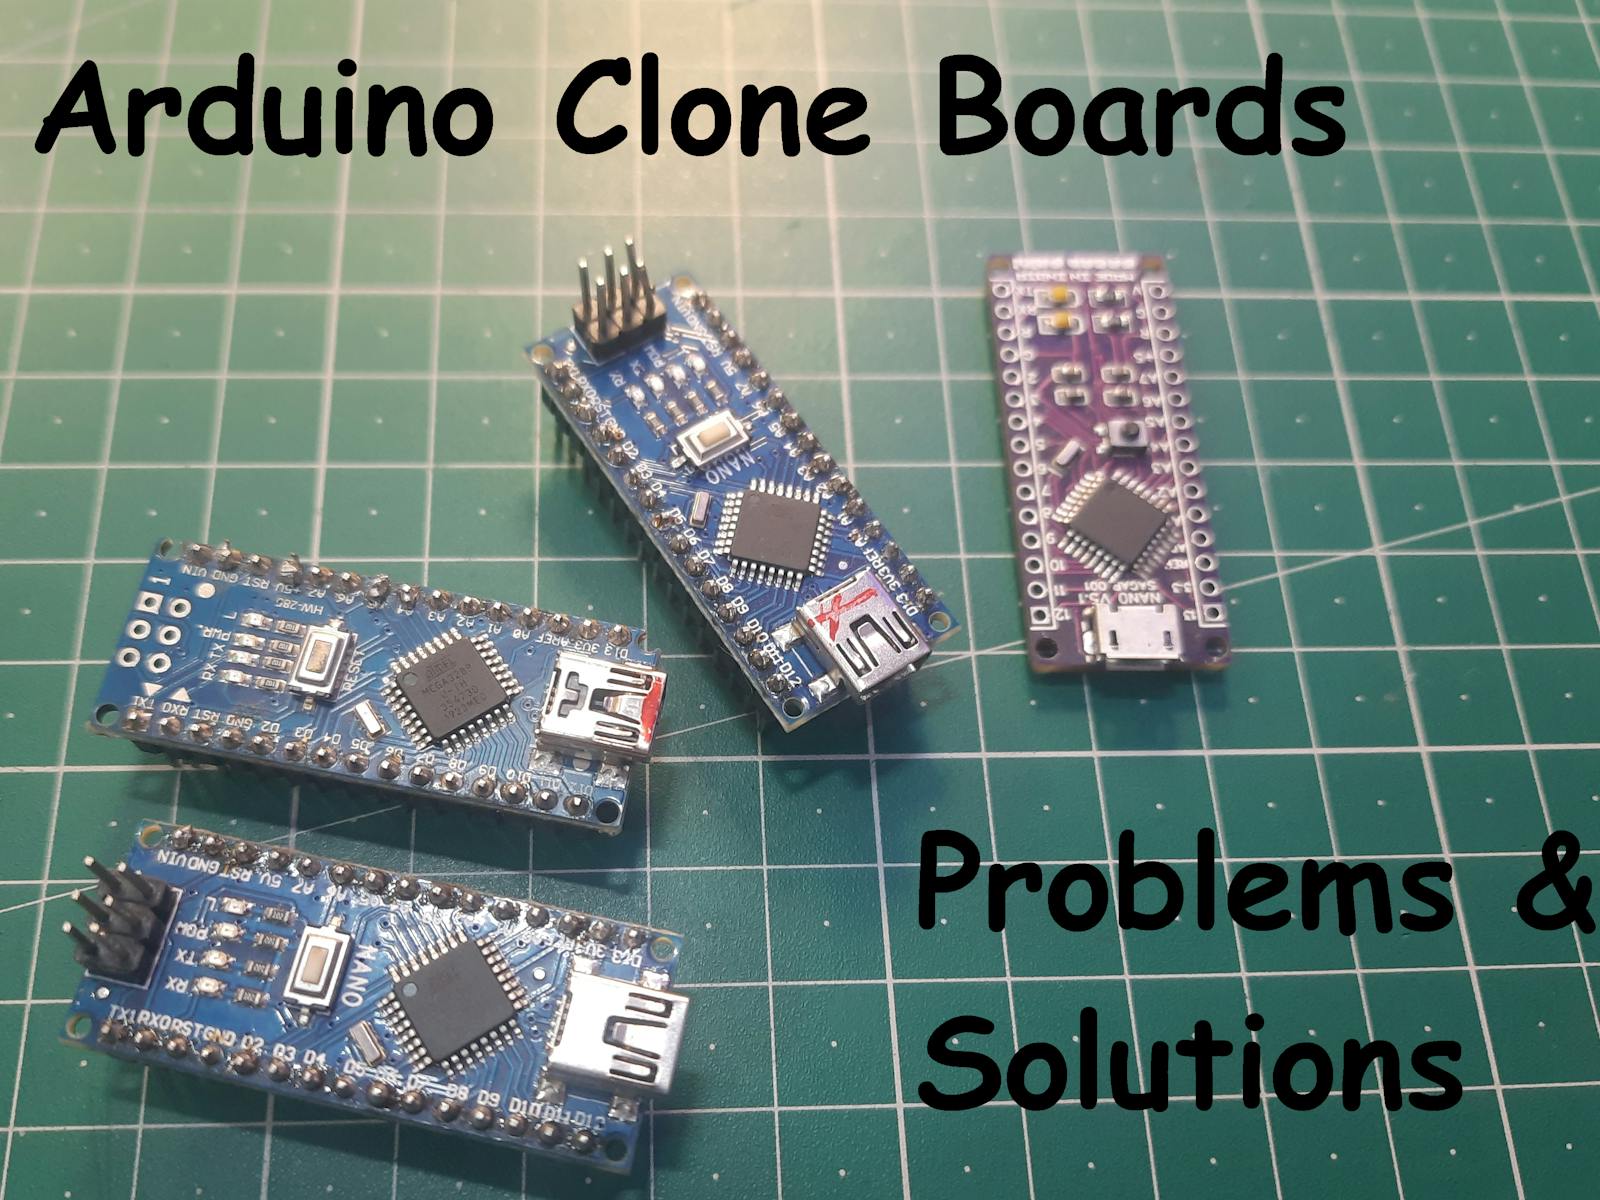 Arduino ch340g troubleshooting, errors and drivers -